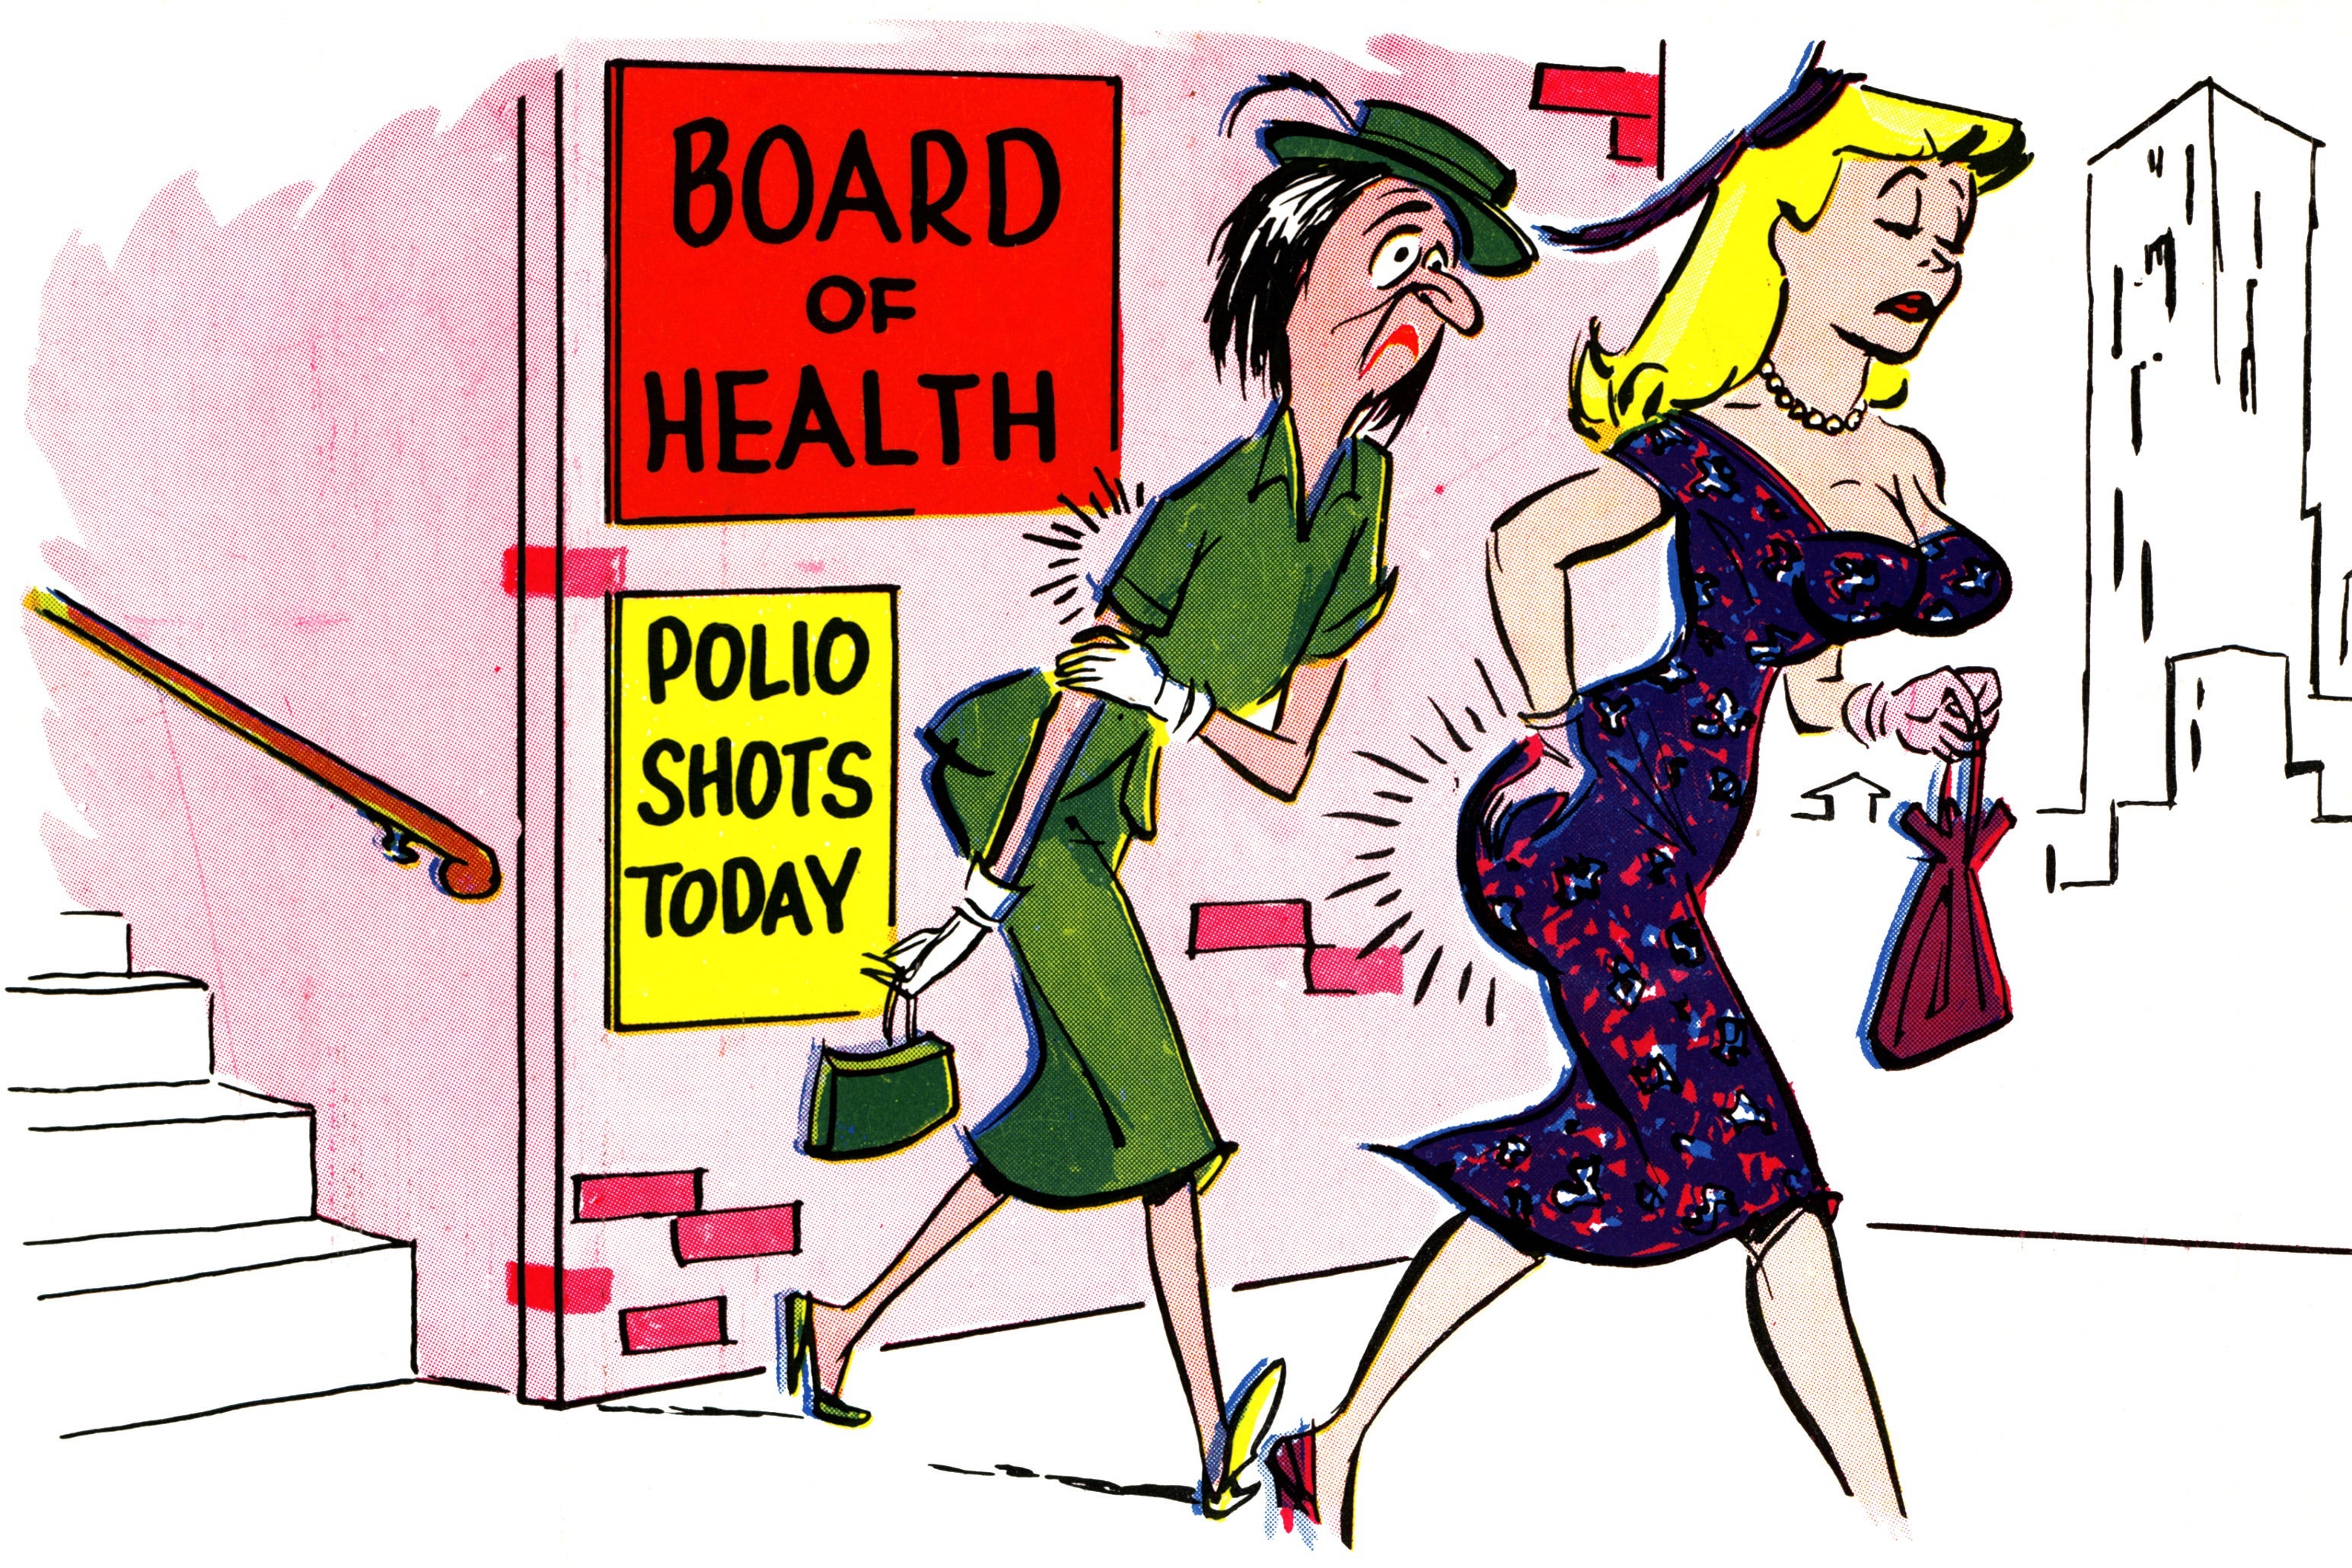 Two women walk away from a building with signs out front that say "Board of Health" and "Polio Shots Today." One woman is depicted as homely and is holding her arm to indicate pain from a shot. The other is depicted as buxom and pretty and is holding her right buttock in the same way.